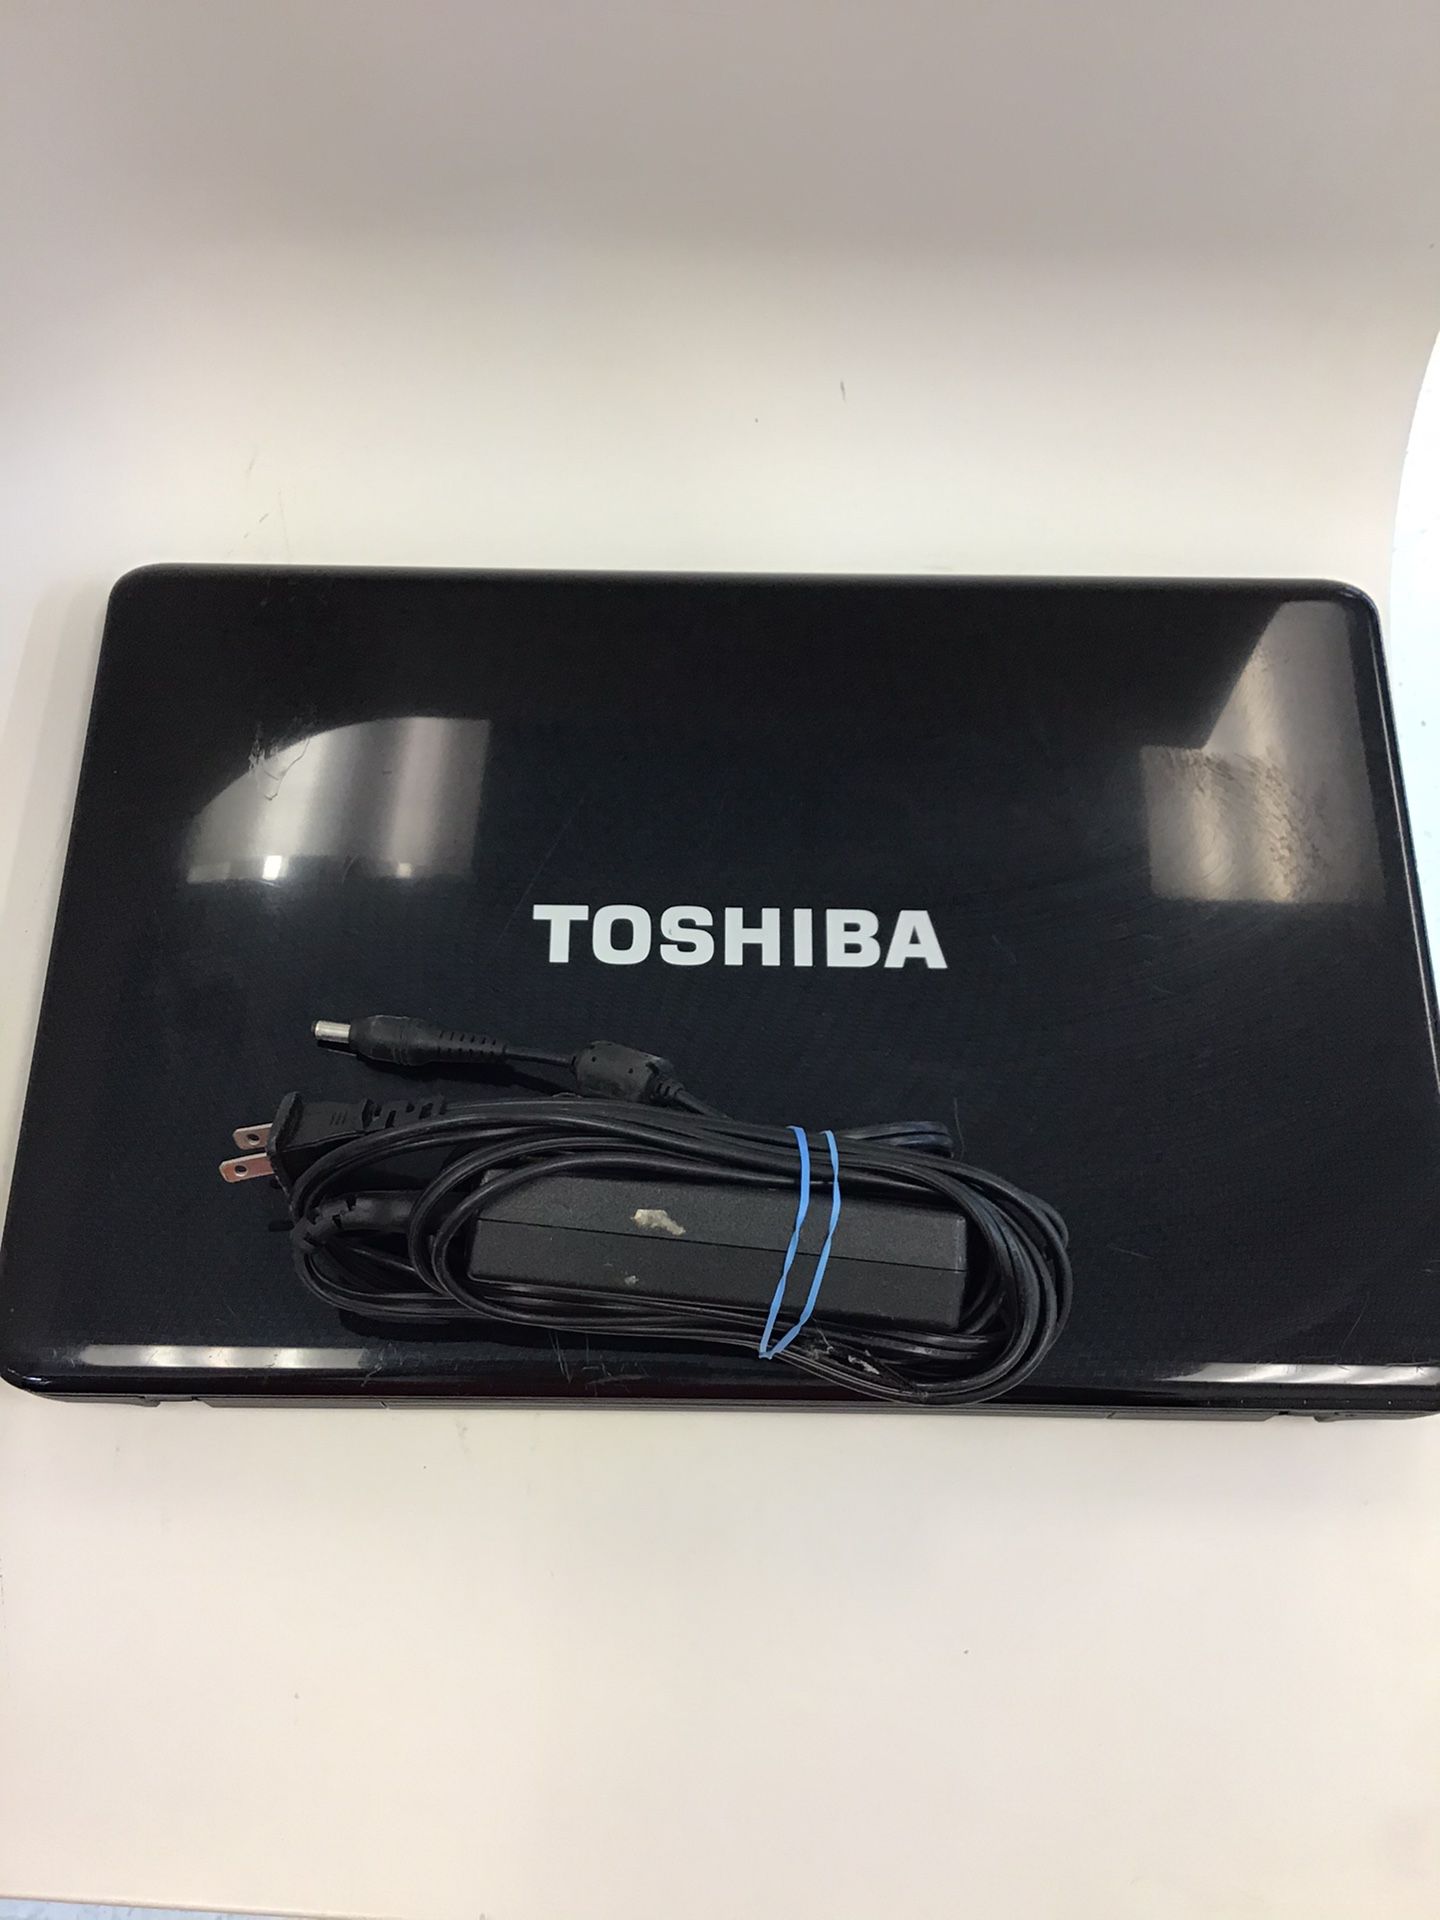 Toshiba Laptop *Part Only*